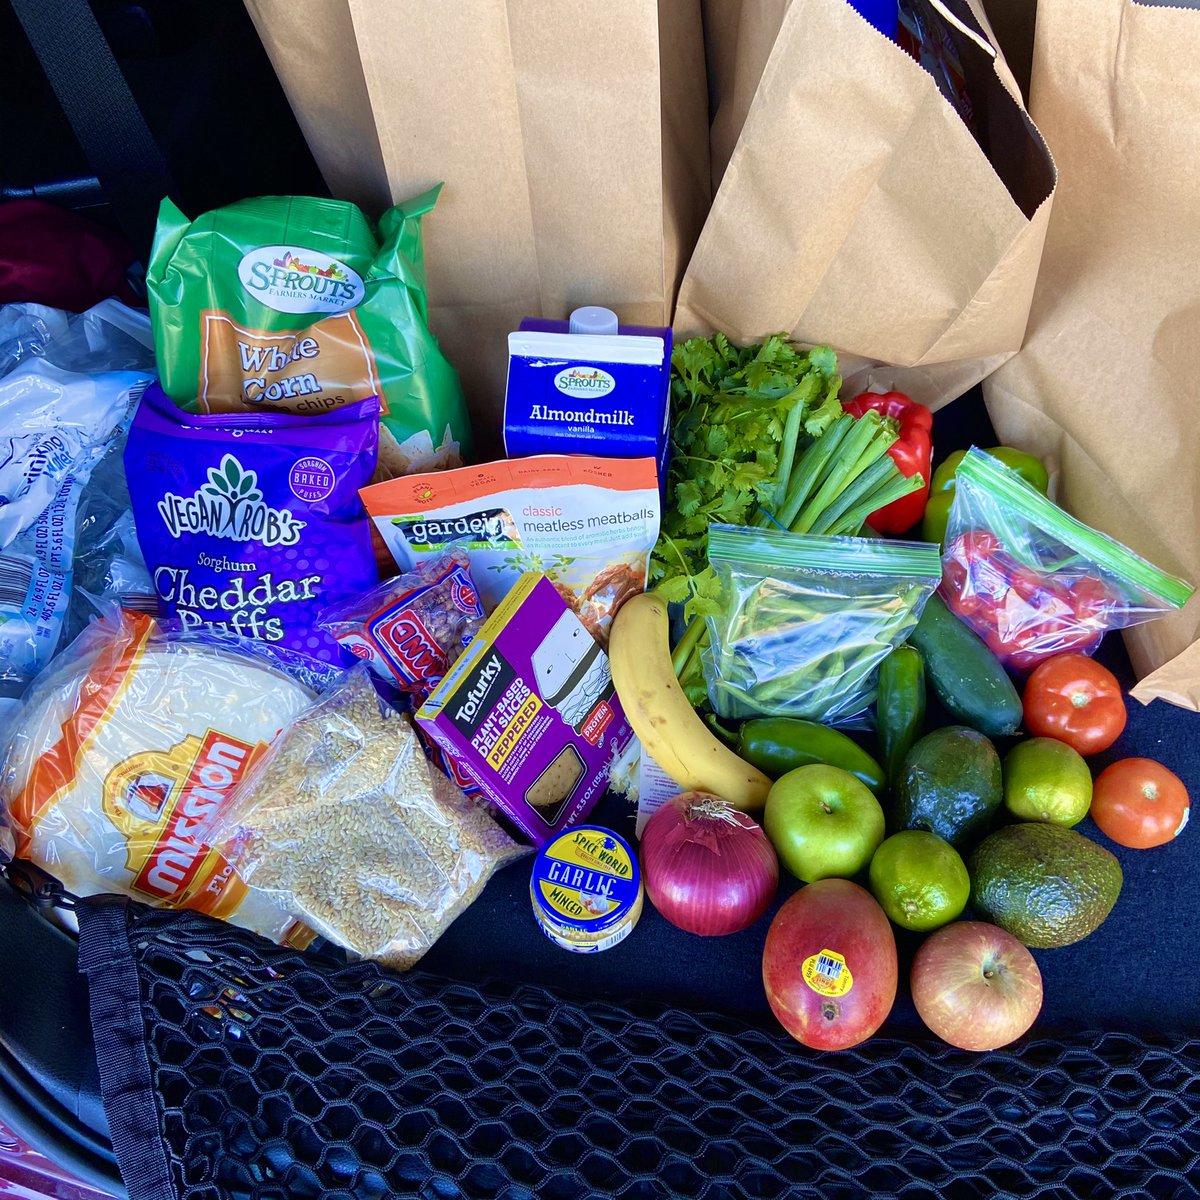 an example of how the two can collaborate: i have been working with  @veganoutreach to bring weekly produce & vegan items to food deserts for almost a year. others have been working with black organizations to do the same in LA. if more vegan organizations did this, it’d be major.